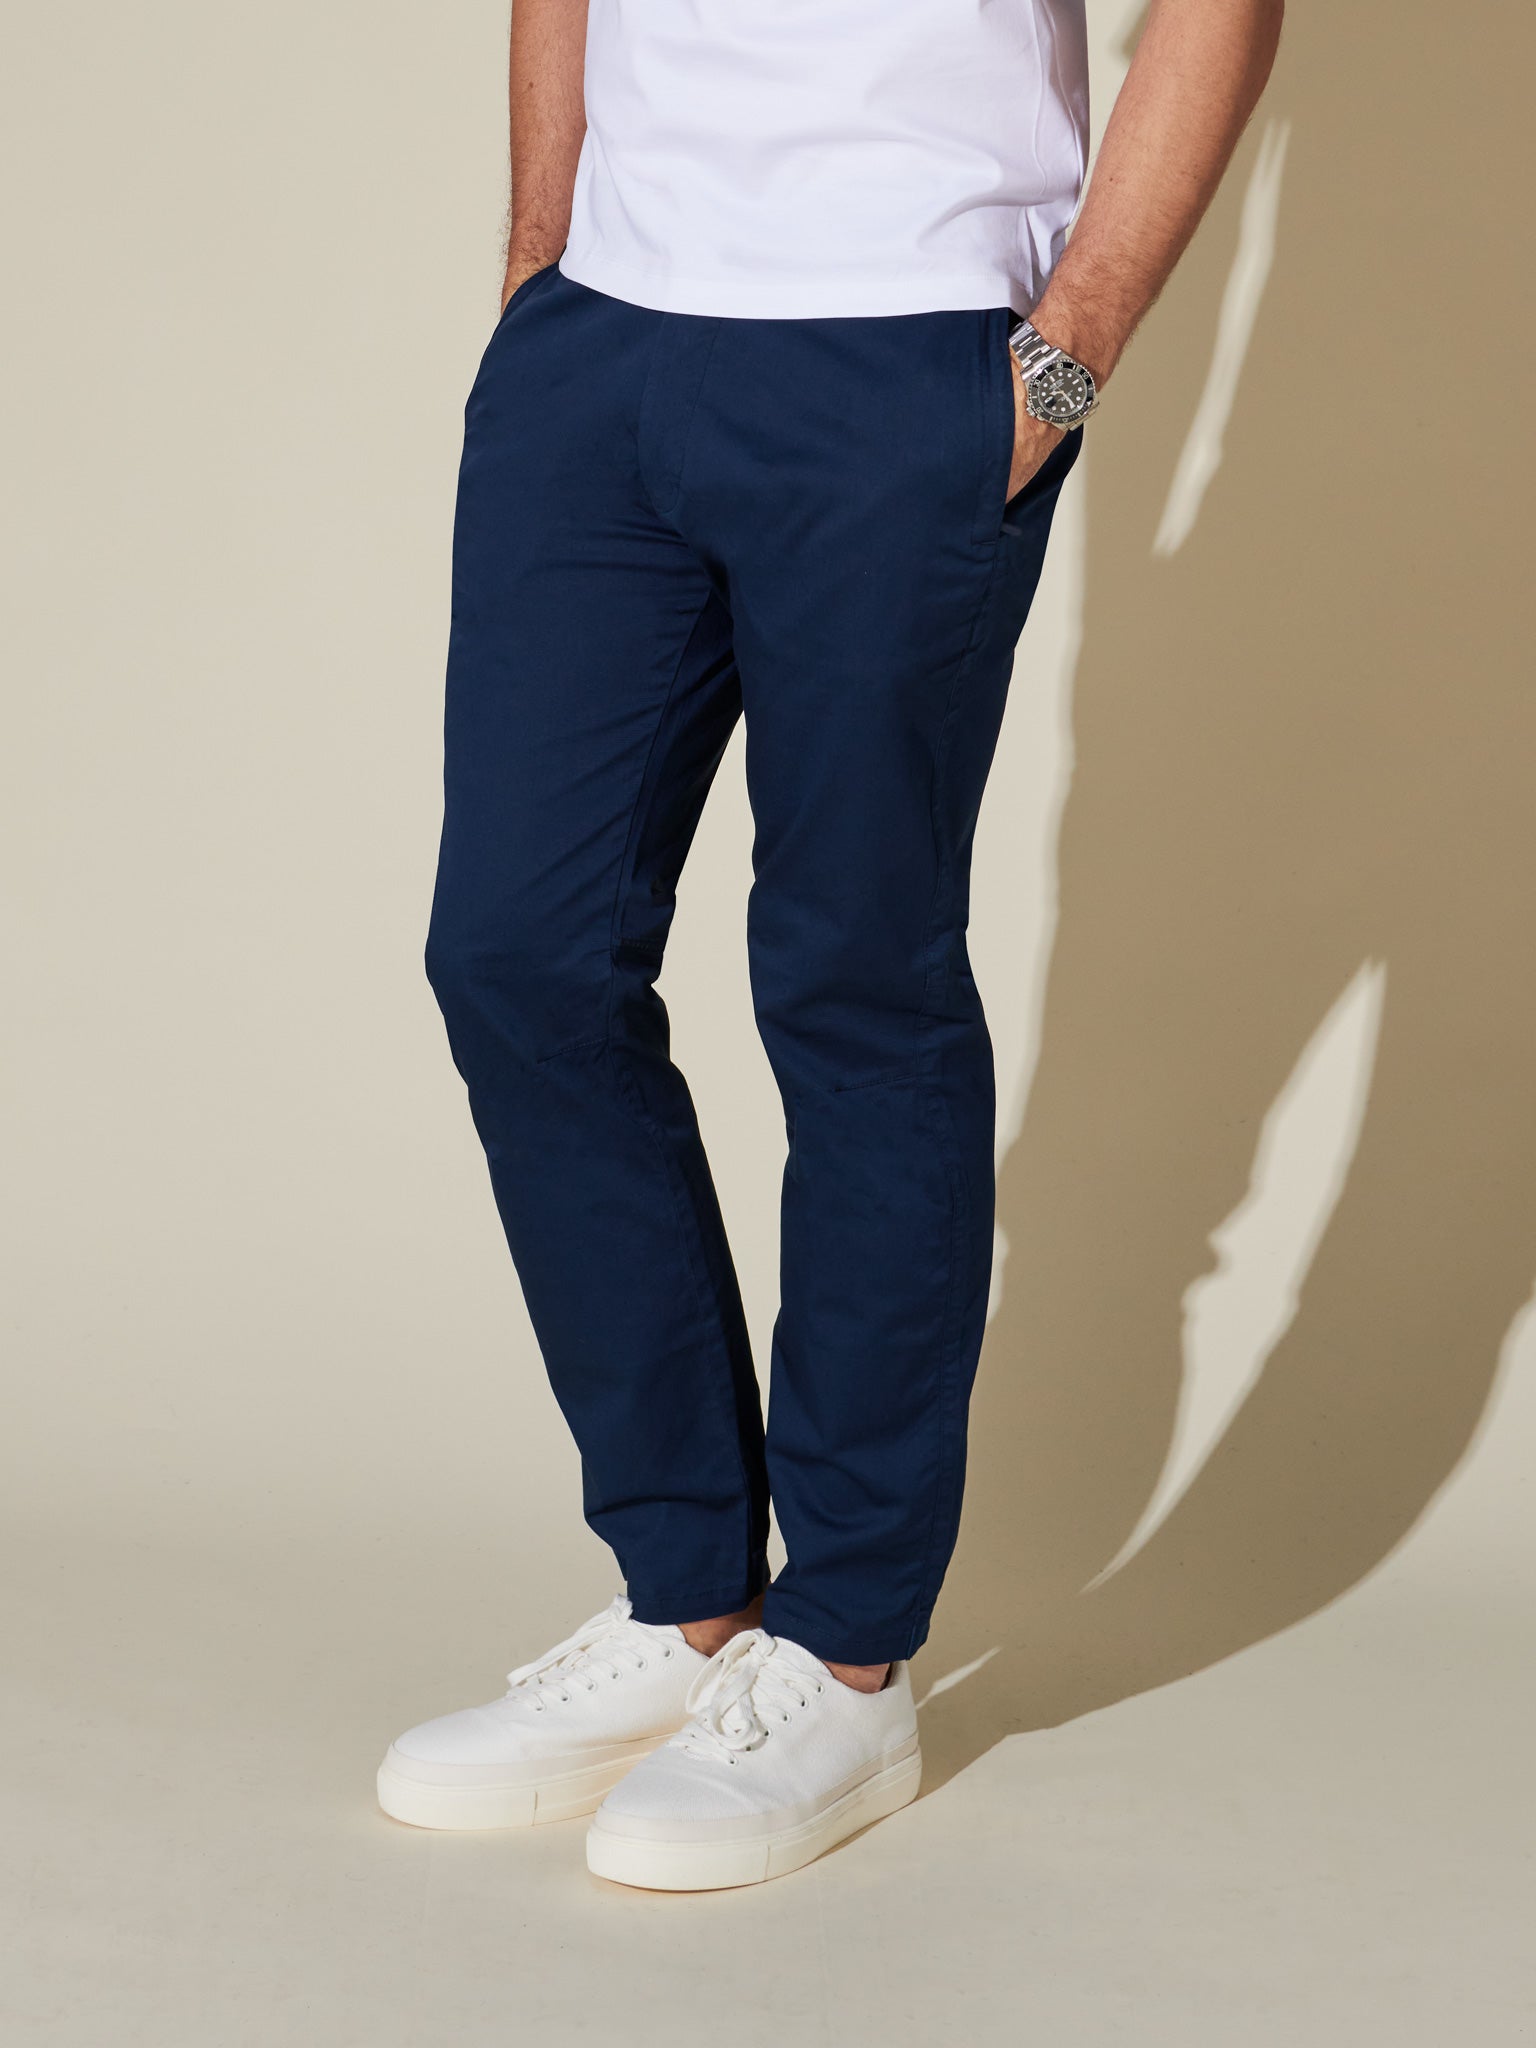 Men's travel trousers in the UK